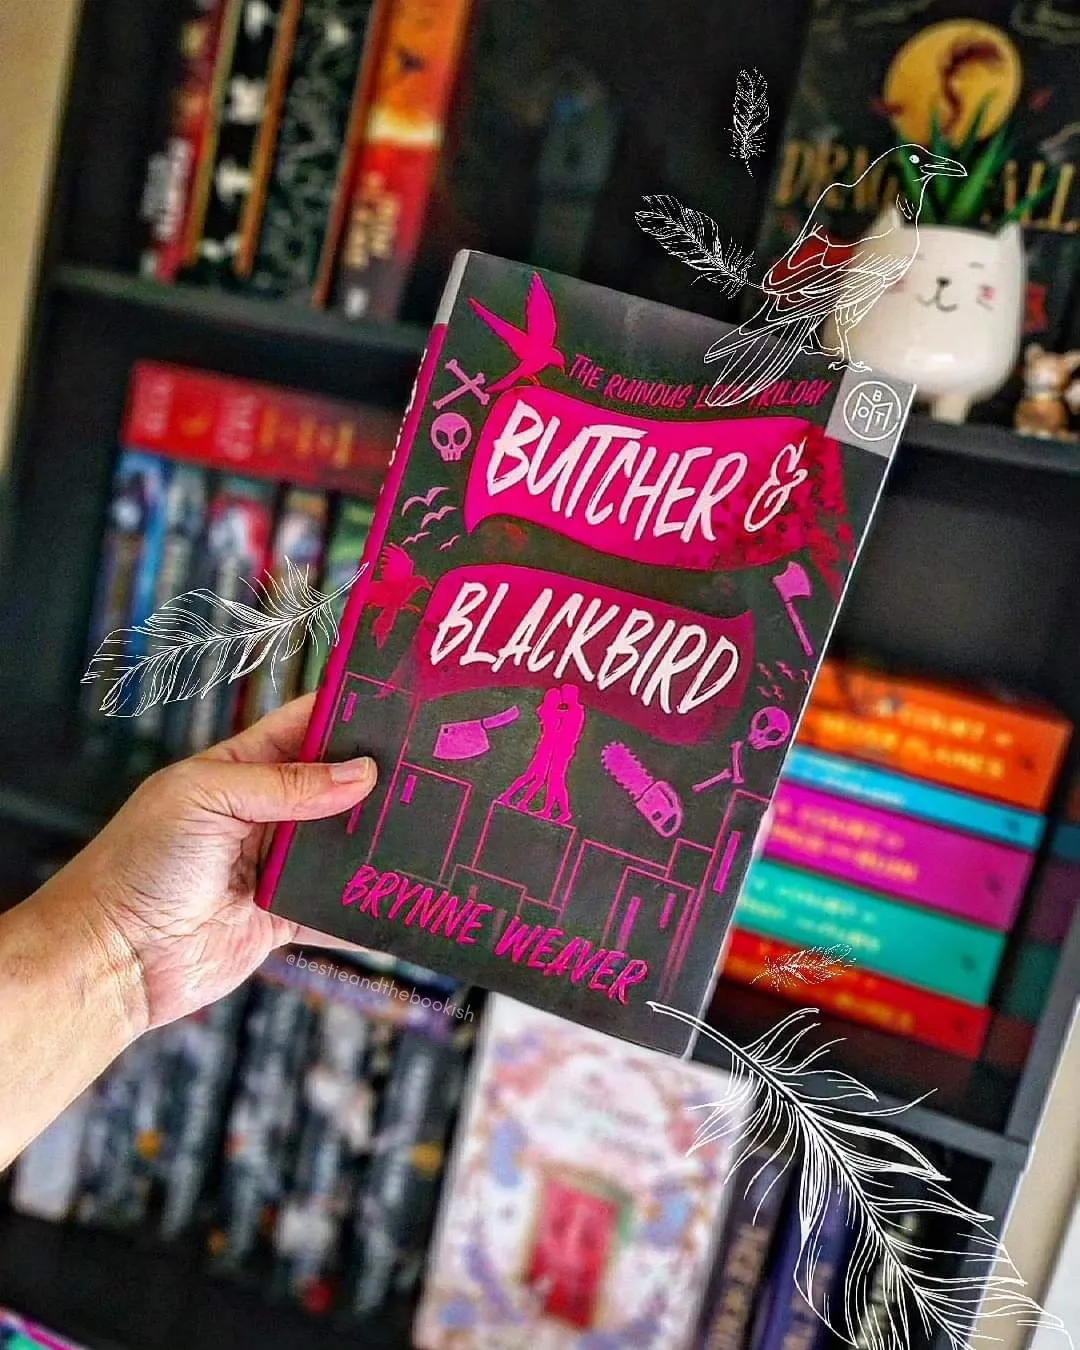 Butcher and Blackbird - Kindle edition by Weaver, Brynne